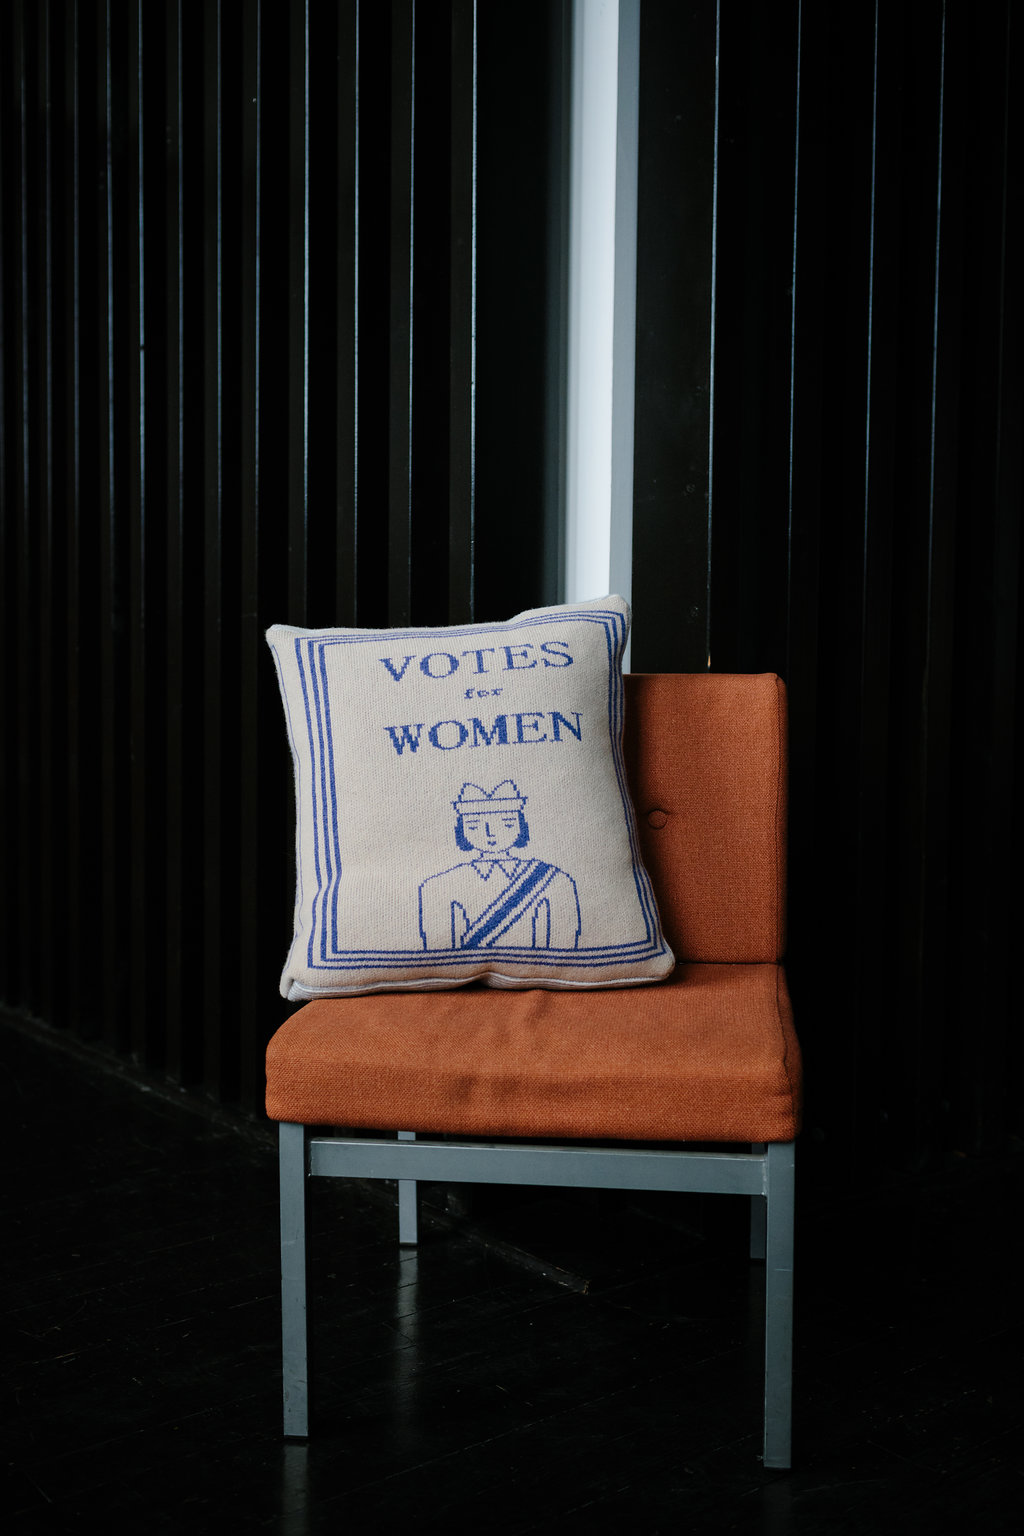 Donna Wilson's Book Cushion on a chair. The cushion has a knitted pattern with 'Votes for Women' above the image of a woman wearing a sash.